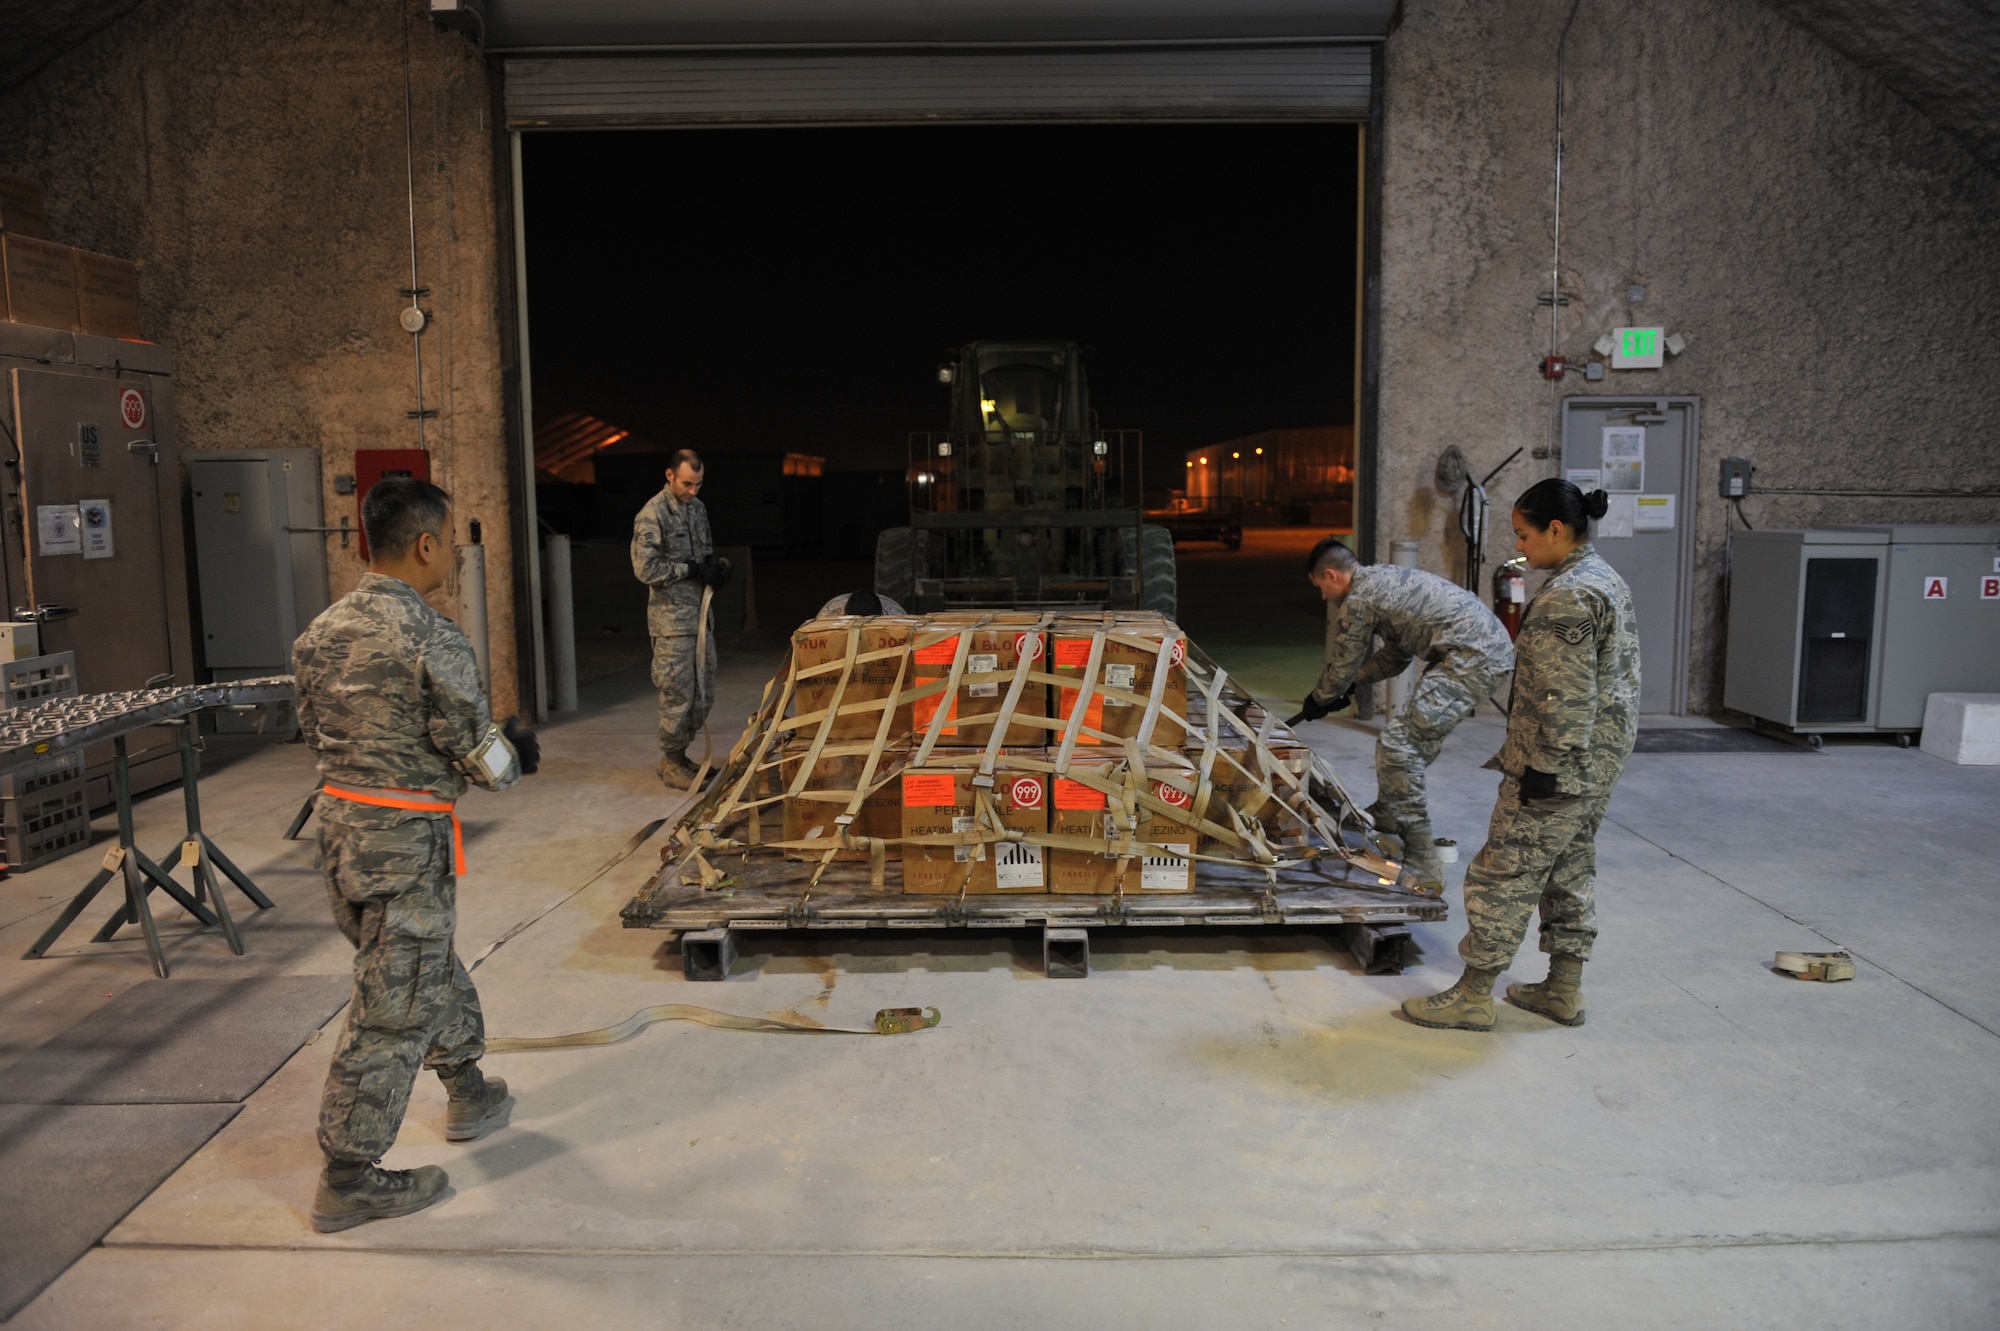 The 379th Expeditionary Medical Group Blood Transshipment Center team tightens the cargo net on a blood product shipment at Al Udeid Air Base, Qatar, Jan. 17, 2014. The BTC serves as the central point for storage and inventory assessment of all blood products in Central Command’s area of responsibility. The BTC ships an average of 600 blood products weekly supporting 43 medical treatment facilities throughout the AOR. (U.S. Air Force photo by Master Sgt. David Miller)